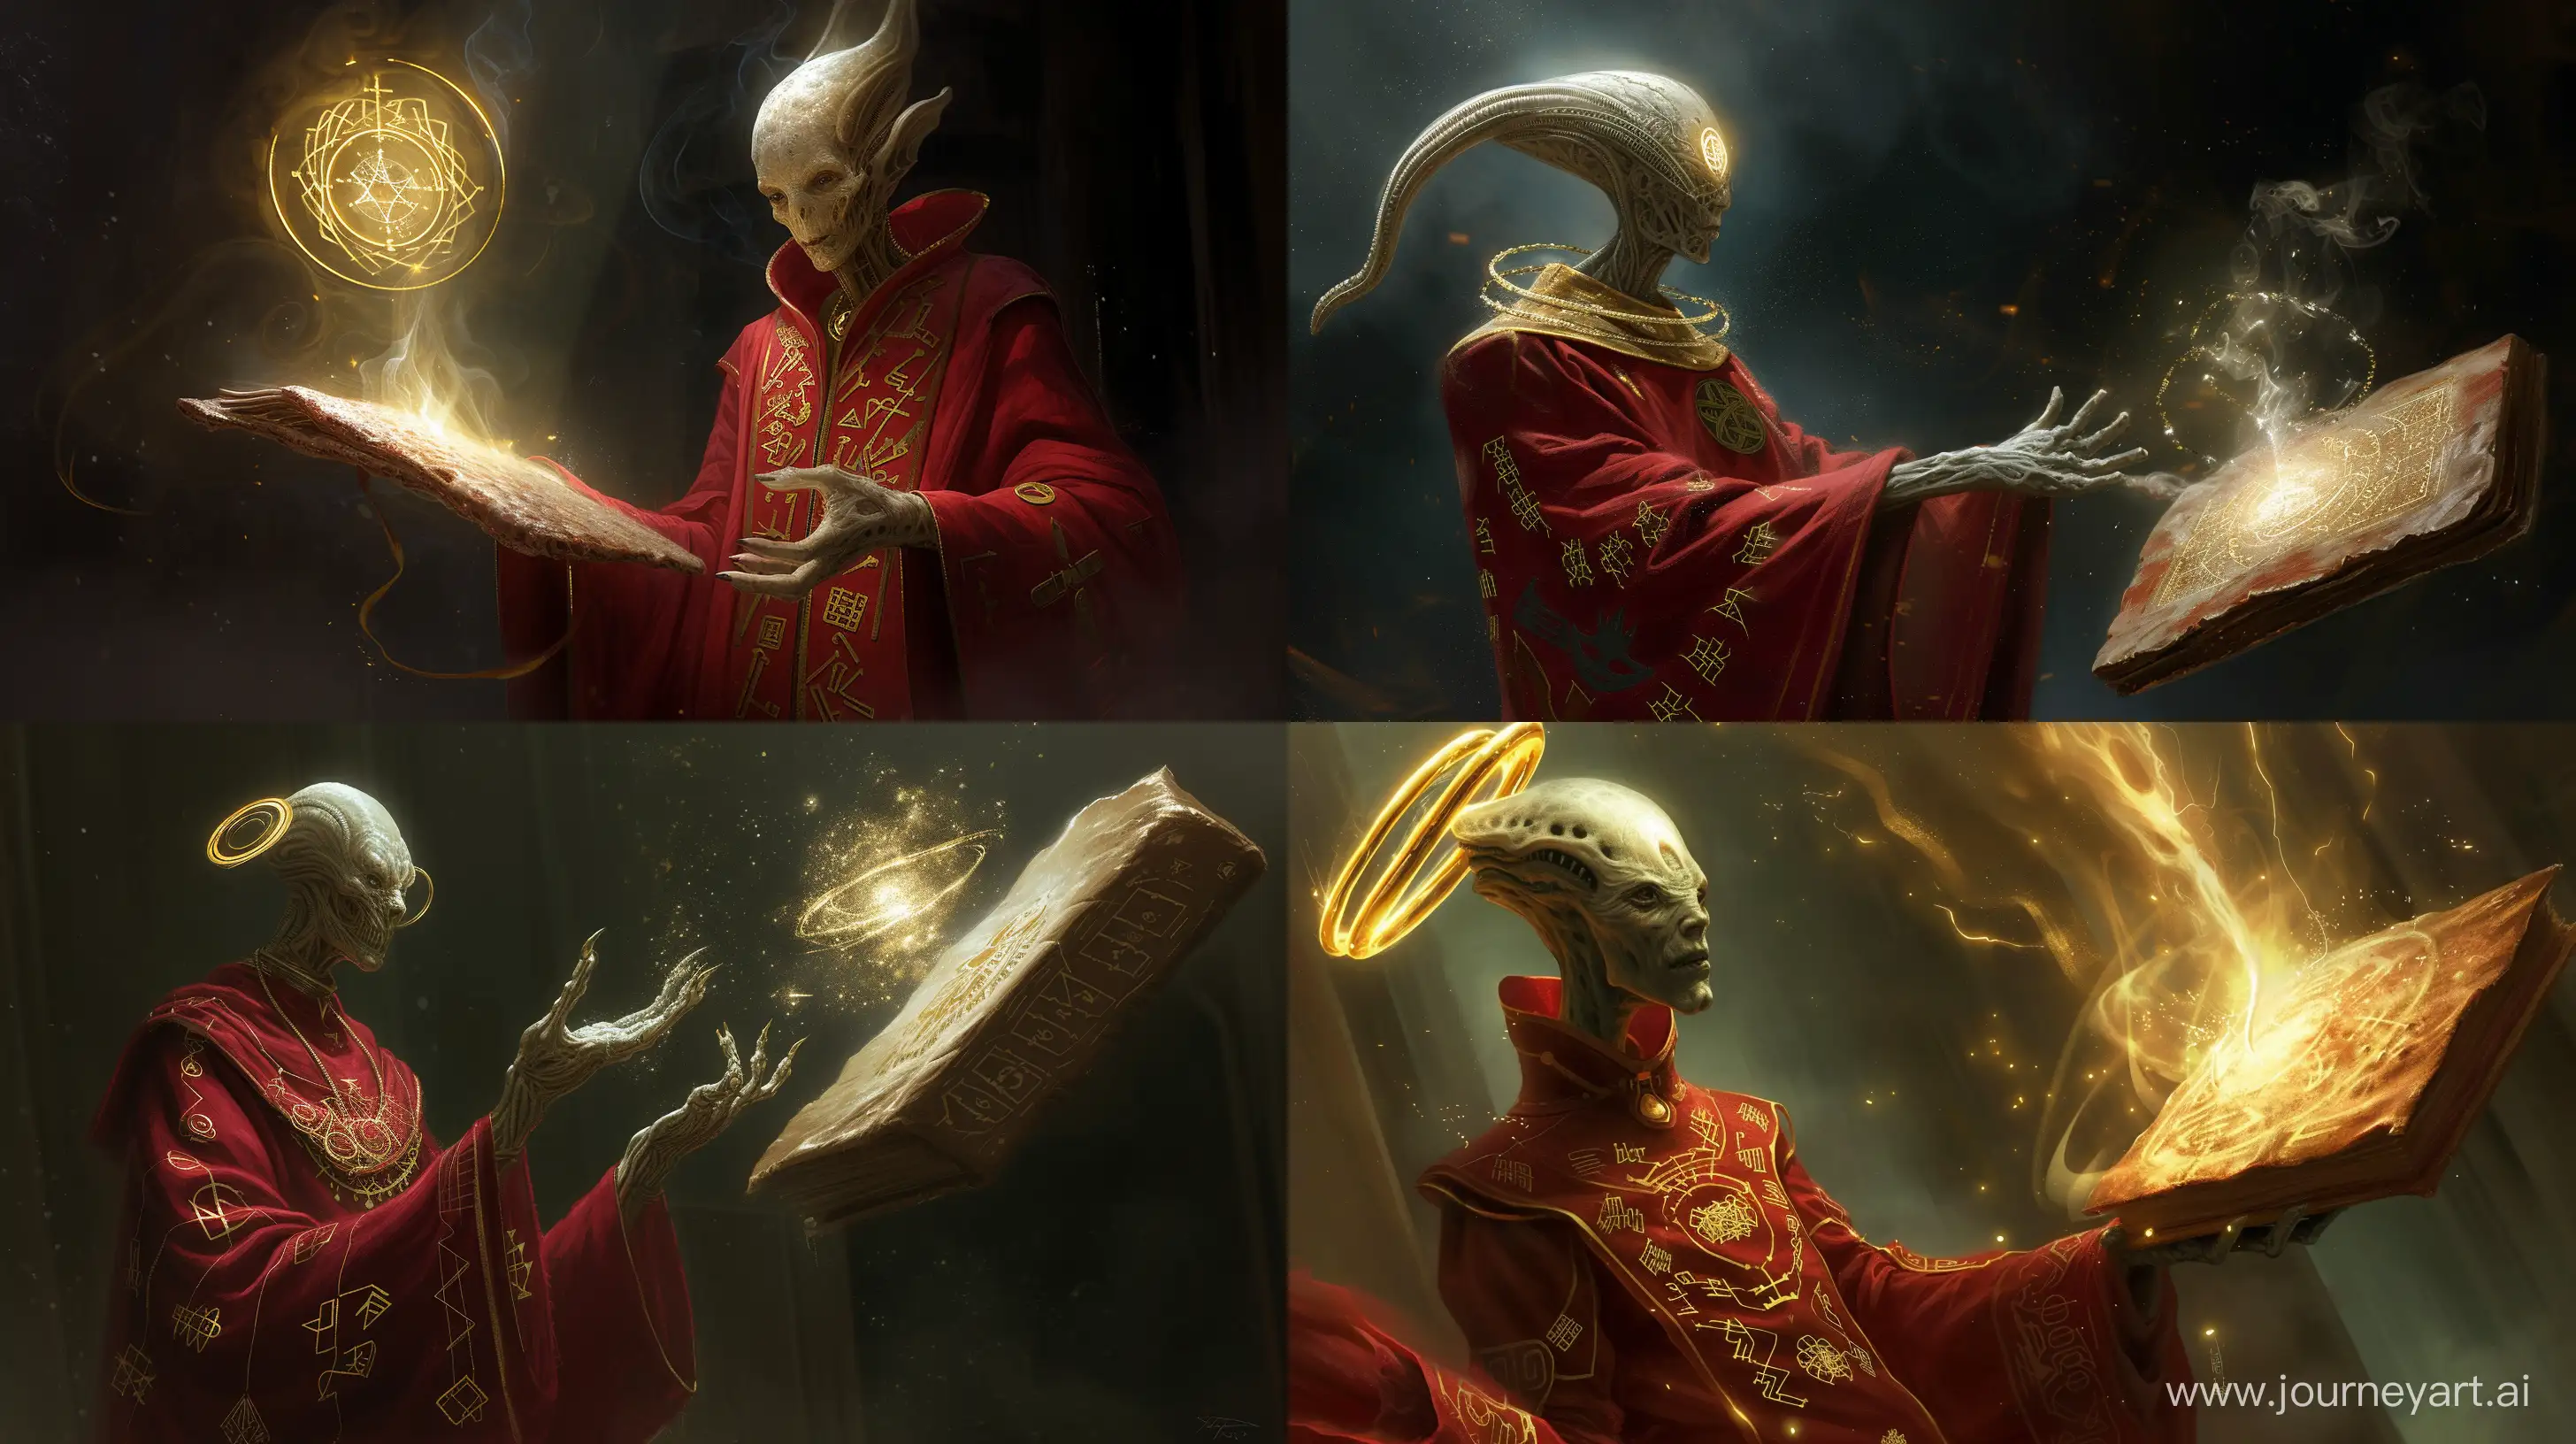 alien-sorcerer, conjuring up power from a floatina futuristic-sorcerer, with elongated head and golden circlet, wearing a red robe with arcane symbols of gold etched.
the sorcerer is conjuring up a spell from a floating, old skin-bound book, dramatic lighting, highly detailed --ar 16:9